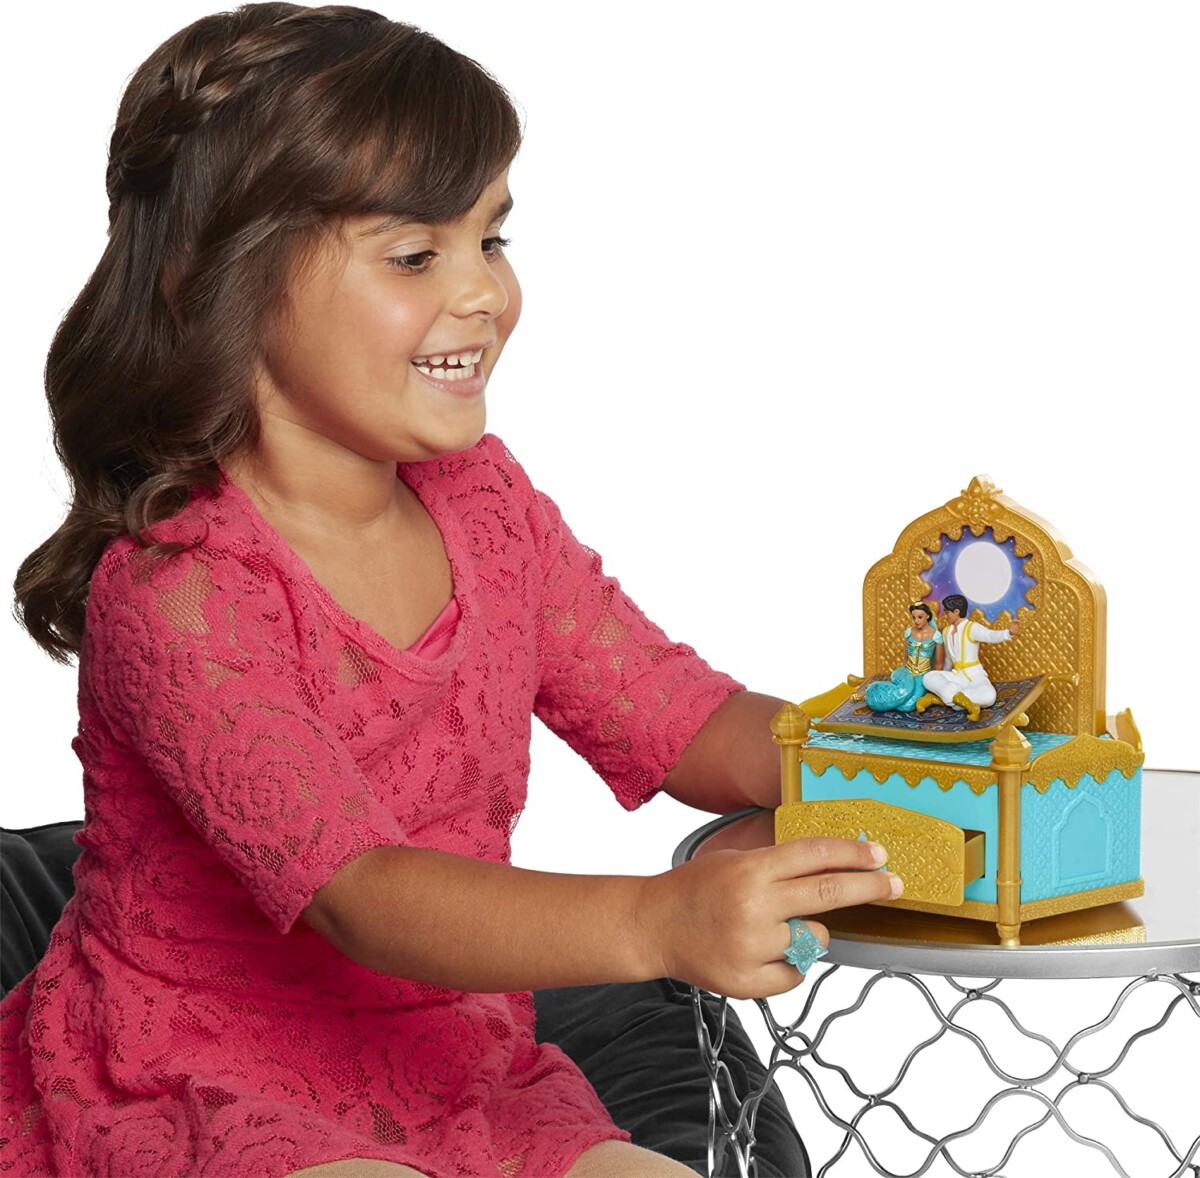 Alea's Deals Aladdin Disney Musical Jewelry Box with Ring to Wear! Up to 70% Off! Was $24.99!  